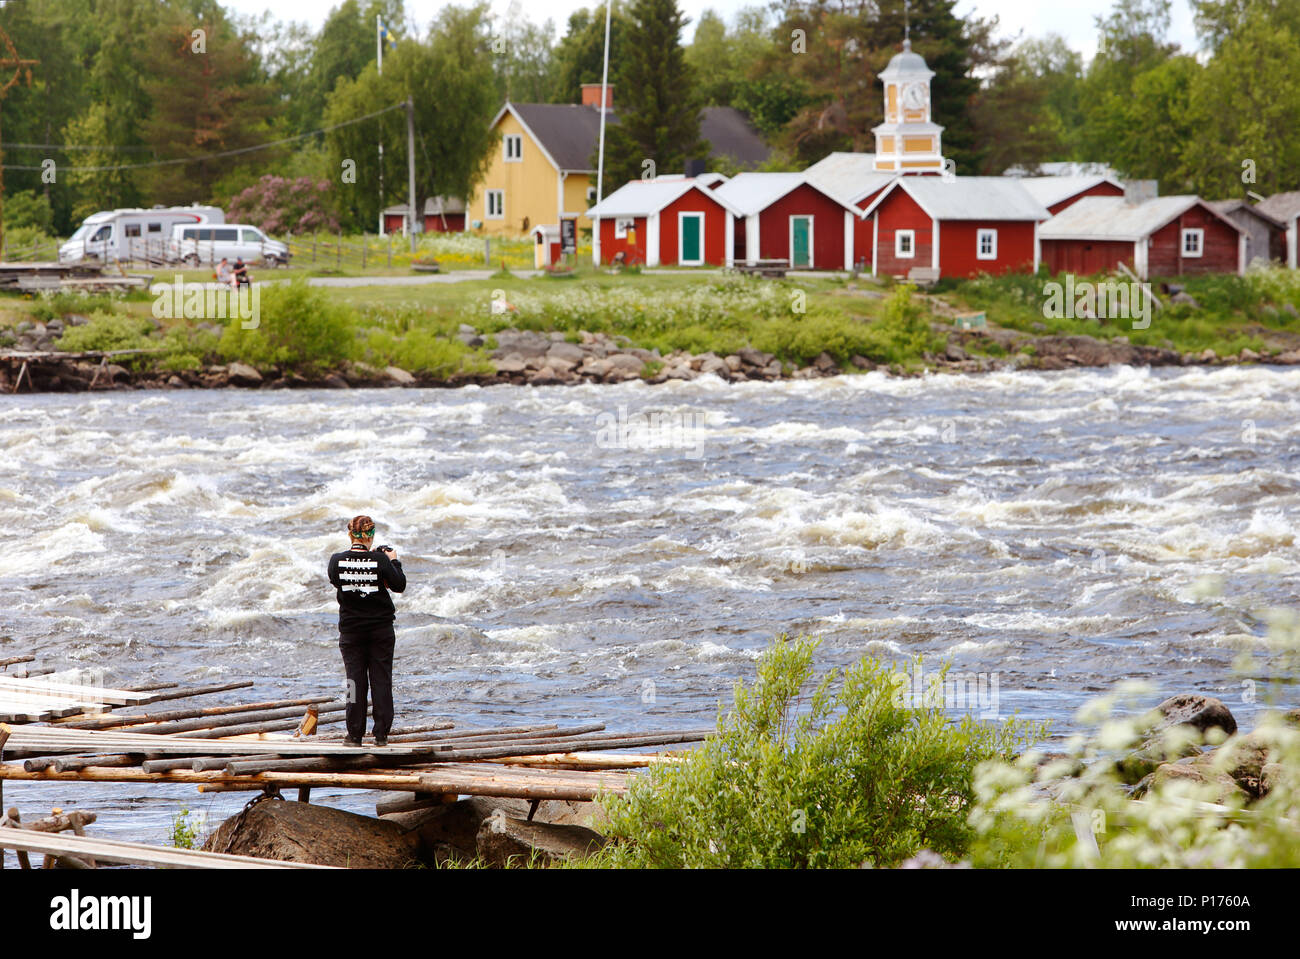 Kukkola, Finland - JUly 3, 2017: A tourist with a camera at the Kukkola rapids in the Torne river at the Finno-Swedish border. Stock Photo